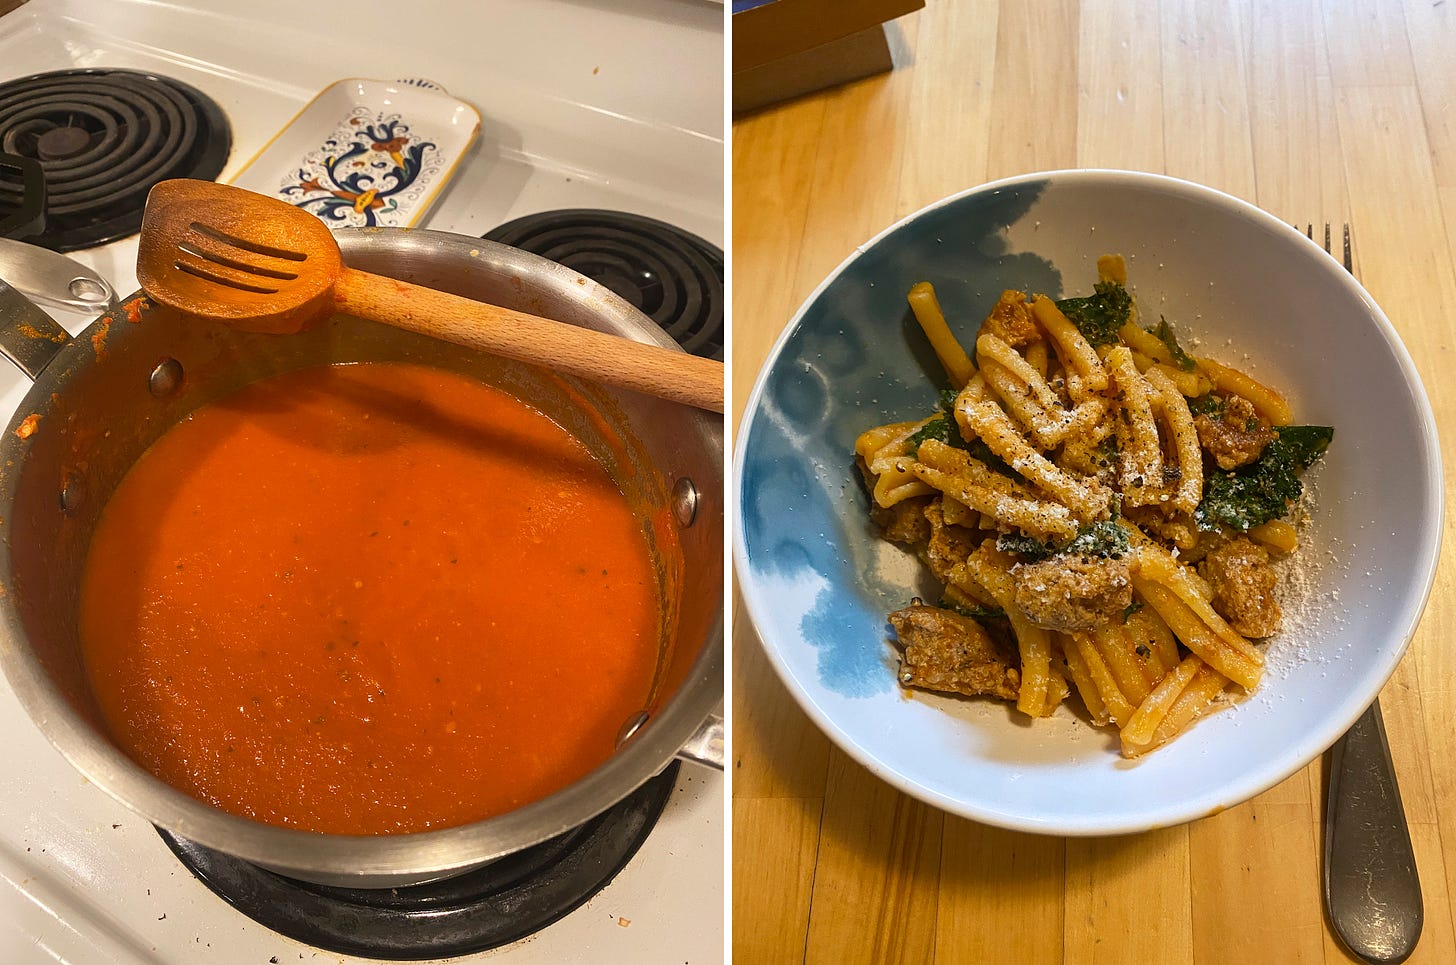 left image: a big pot of tomato sauce on top of the stove, with a wooden spoon resting at its edge. right image: a bowl of casarecce in a meaty sauce with kale.